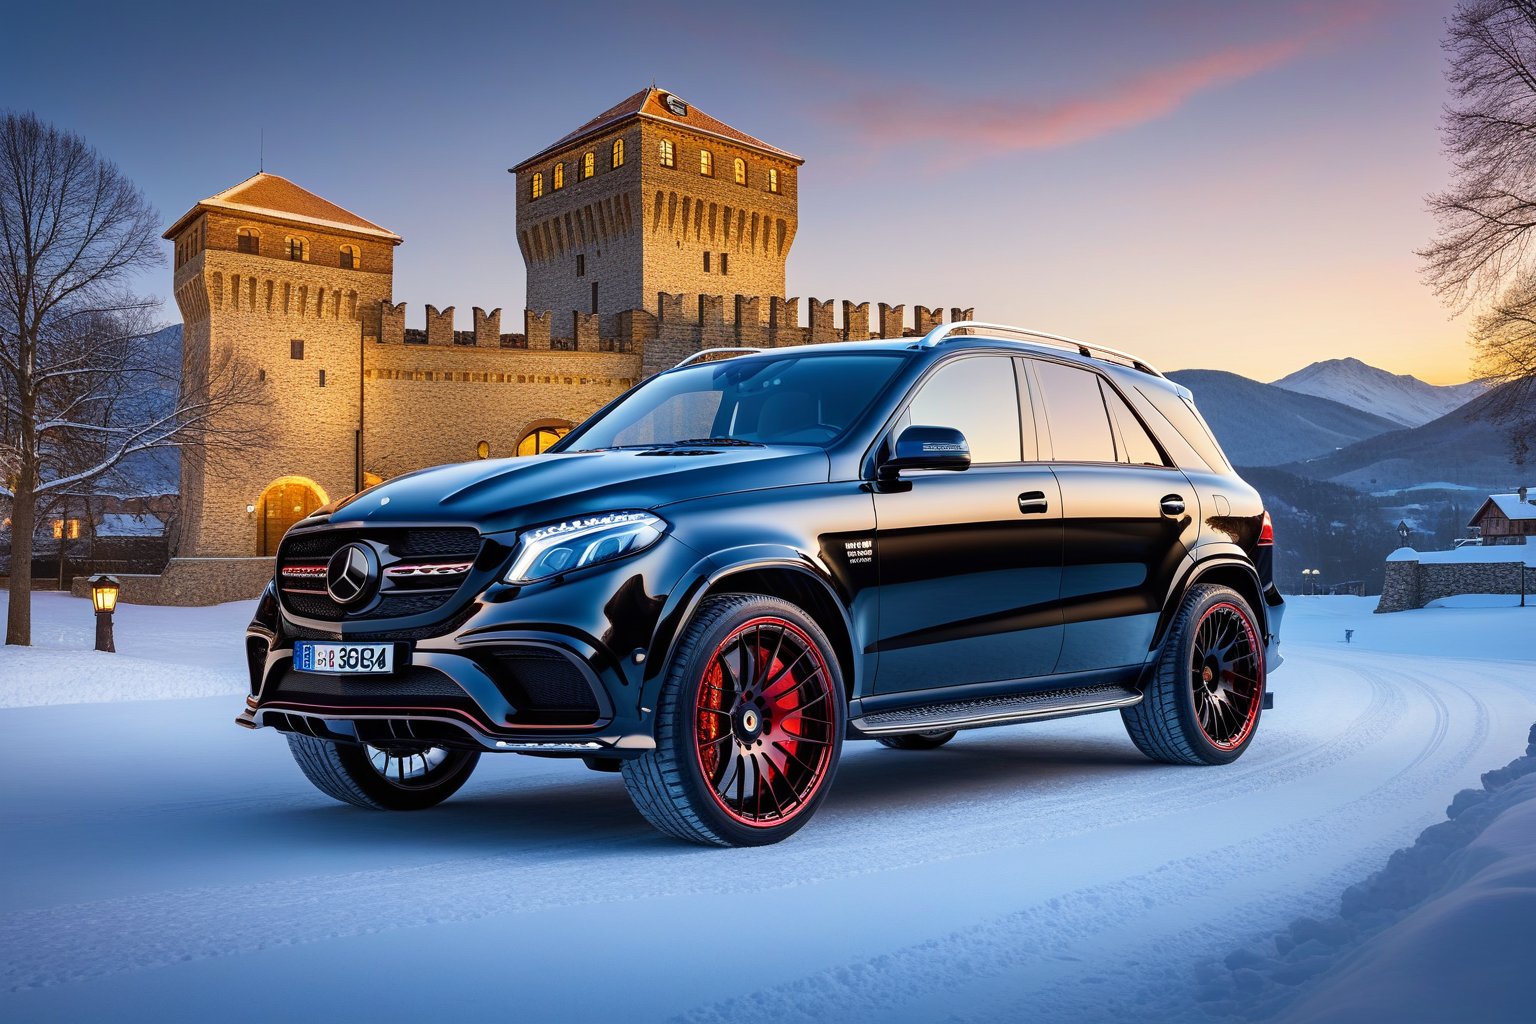 (1 car,  2024 Brabus AMG GLE 63 900 Rocket,  FEDYA written on the noera,  customized and improved by Brabus tuning company),  Brabus AMG GLE 63 900 Rocket,  parked against the background of a medieval castle,  snowy,  night time,  (best quality,  realistic,  photography,  highly detailed,  8K,  HDR,  photorealism,  naturalistic,  realistic,  raw photo),  H effect,  dragon_h,  itacstl,<lora:EMS-279657-EMS:0.800000>,<lora:EMS-290677-EMS:0.800000>,<lora:EMS-281129-EMS:0.800000>